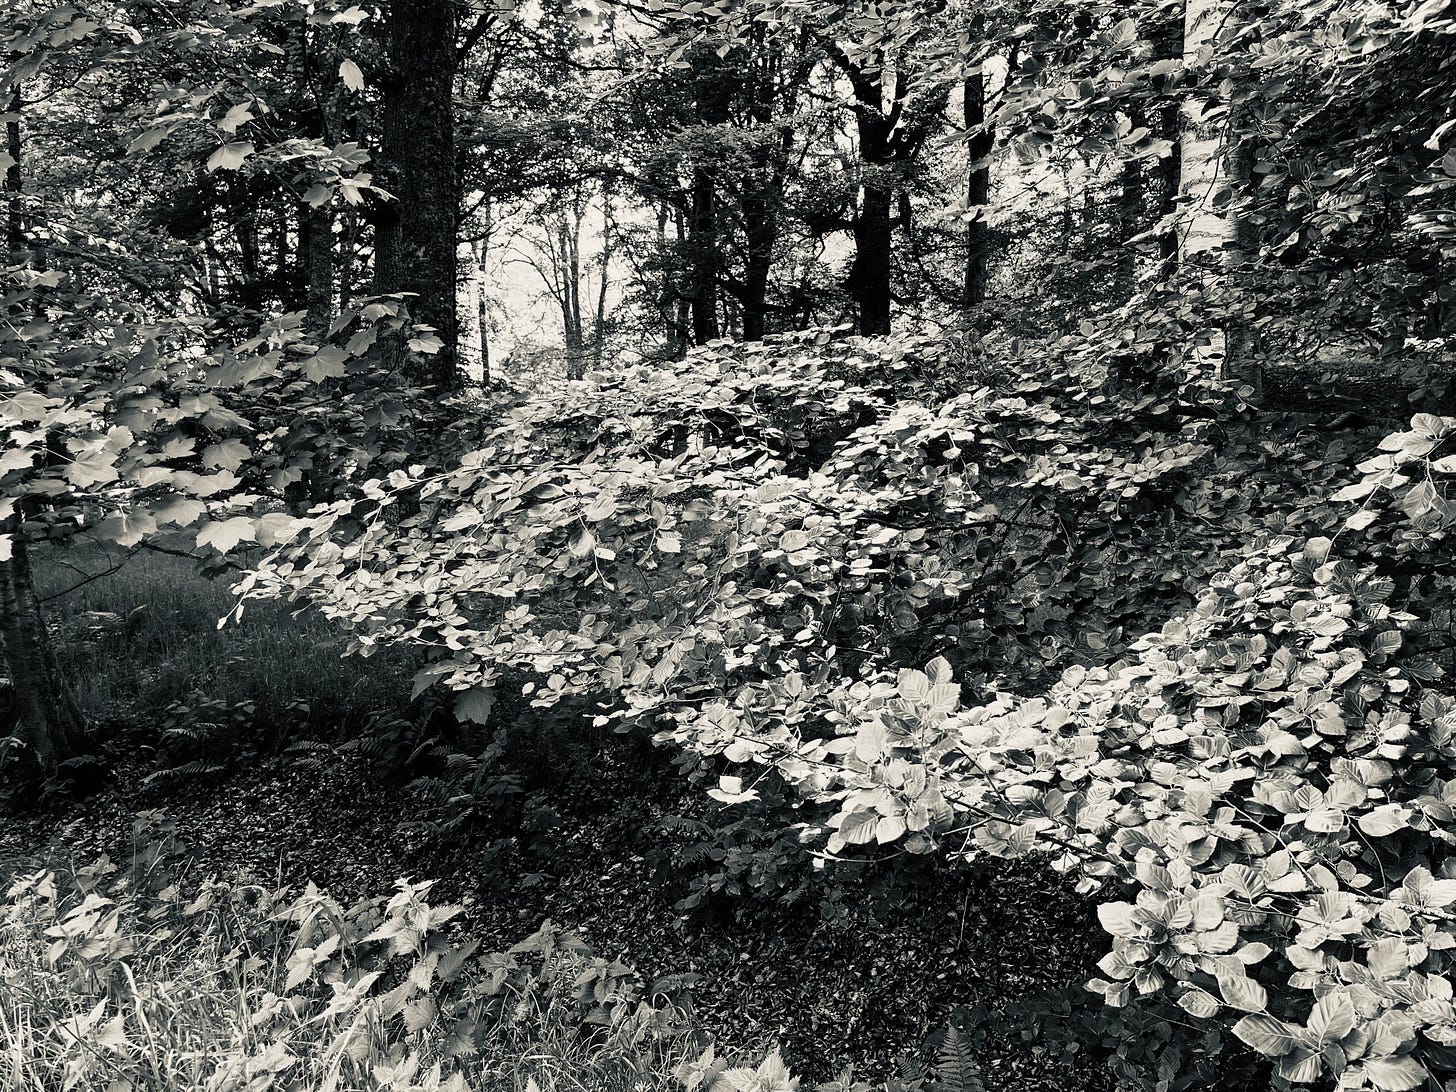 Layers of beech foliage appears to float below the trunks of trees on the hillside; monochrome view